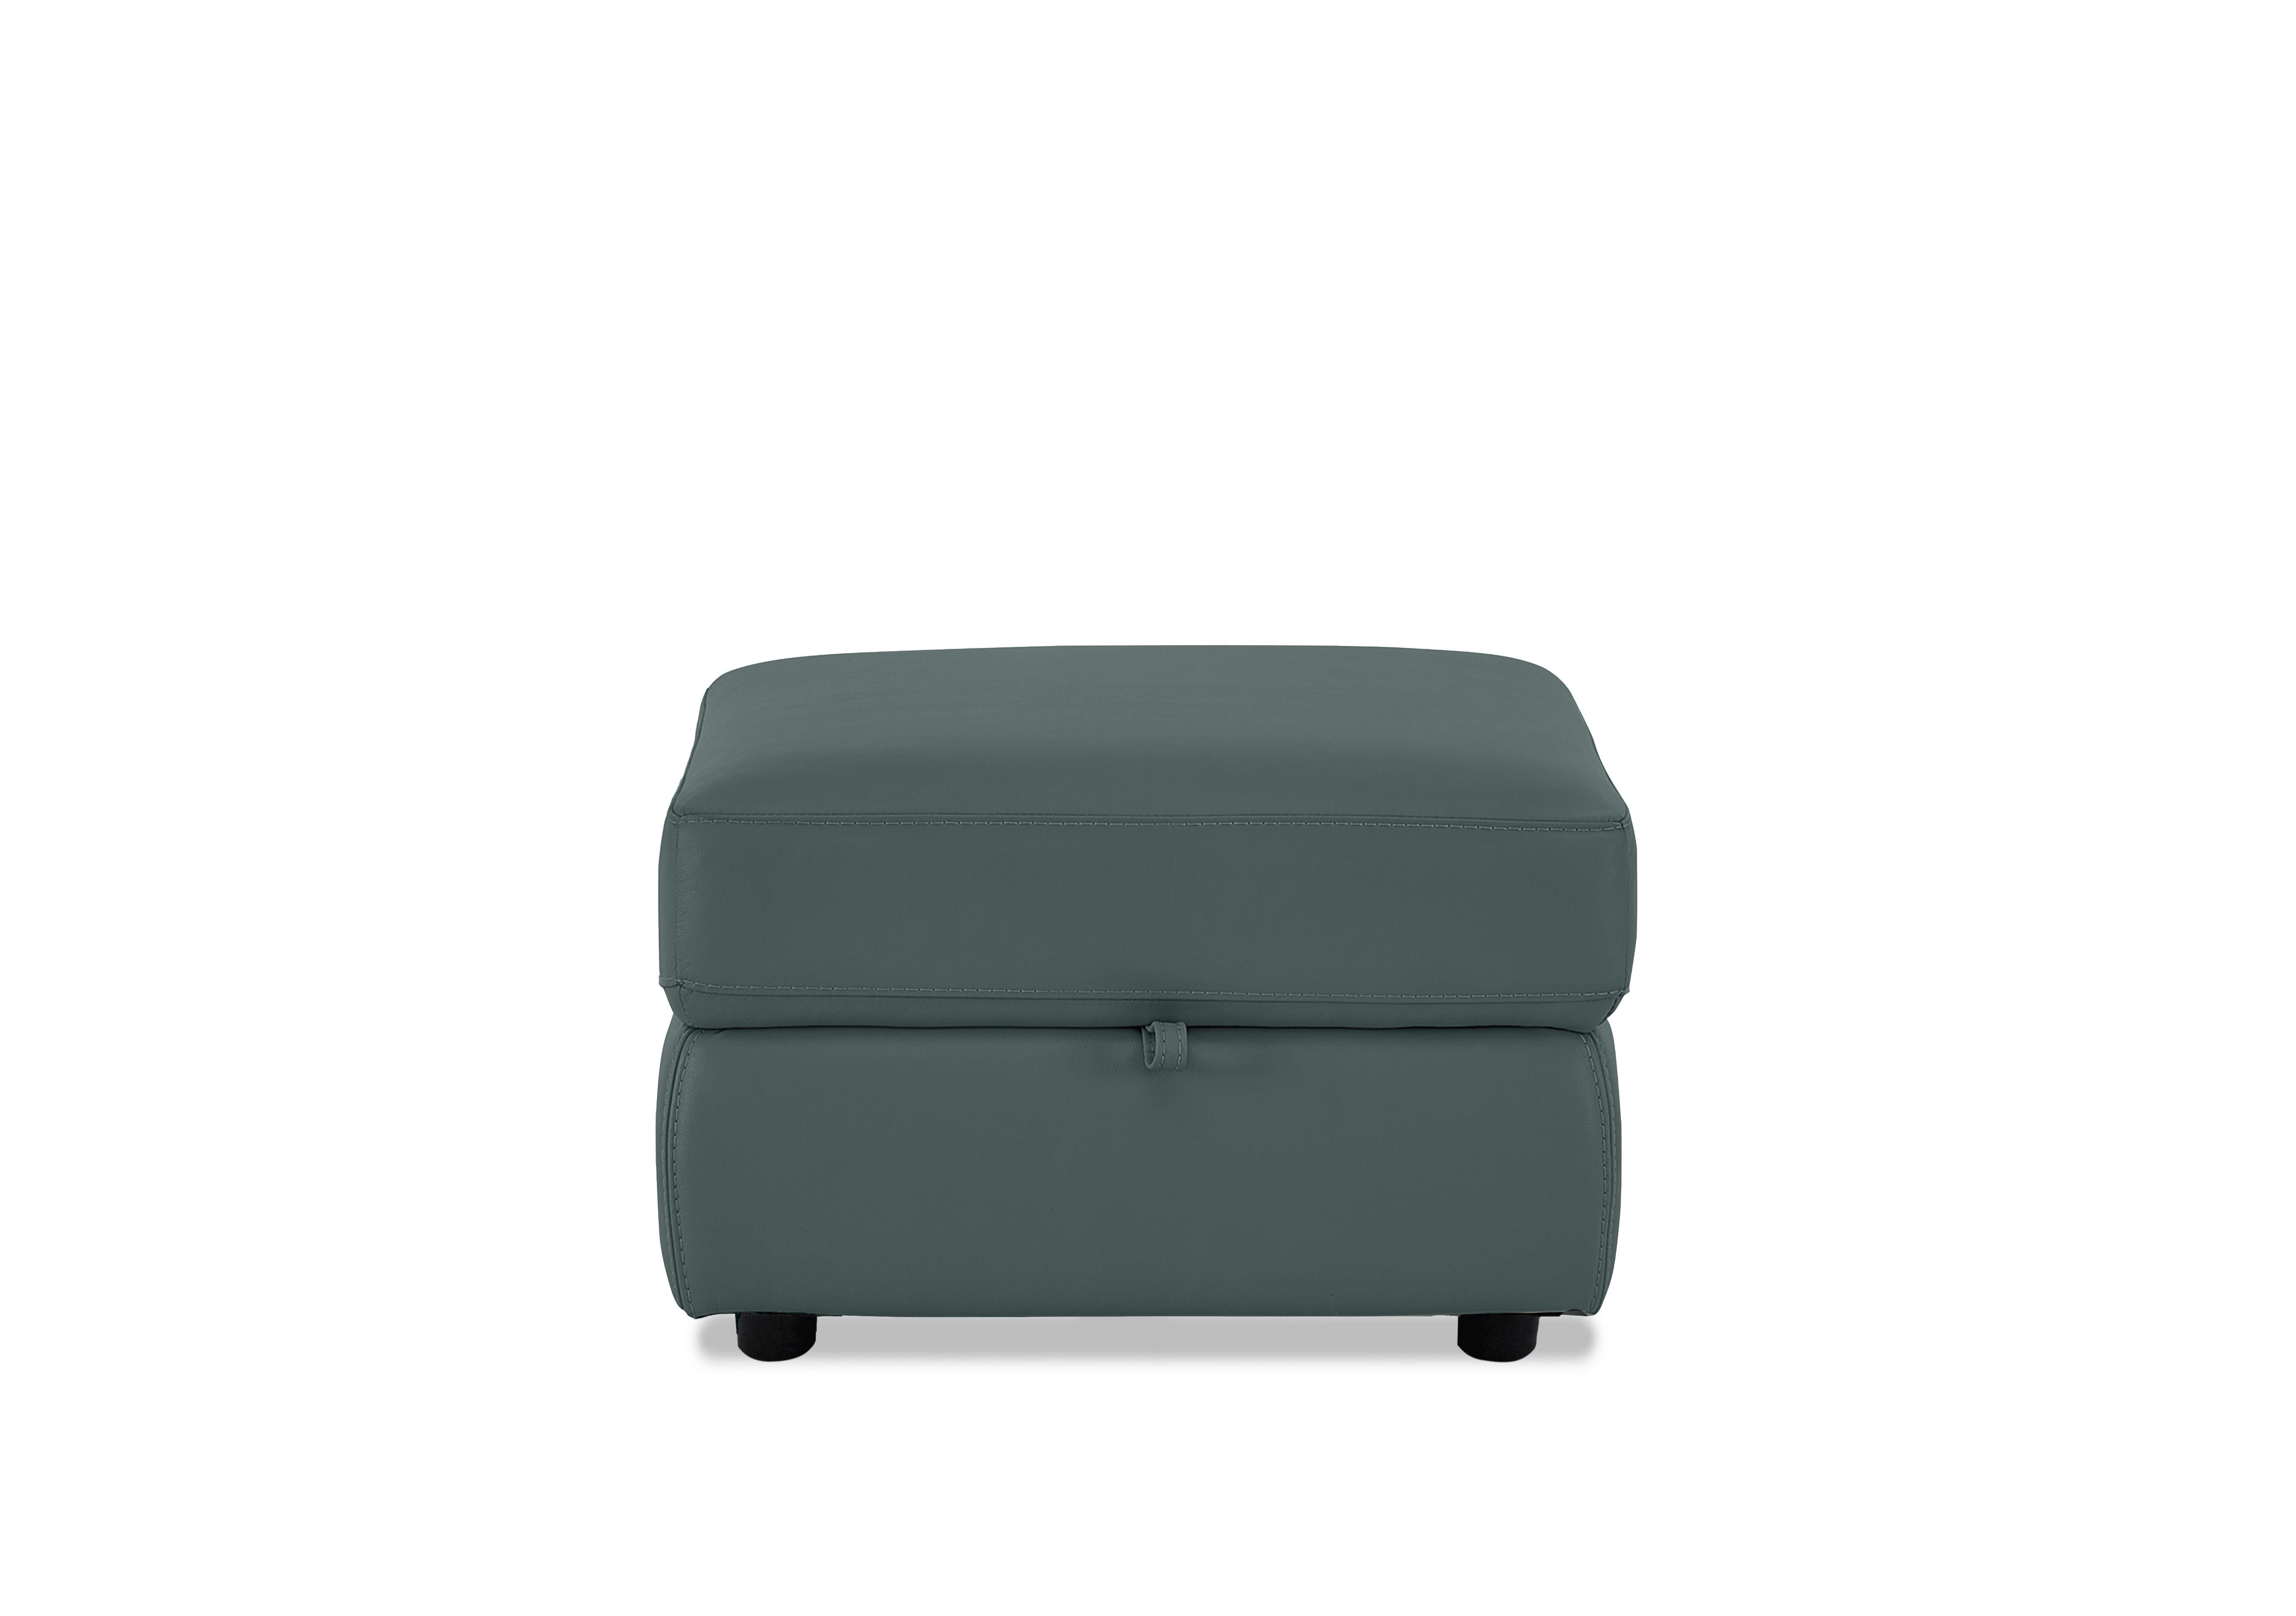 Touch Leather Storage Footstool in Bv-301e Lake Green on Furniture Village